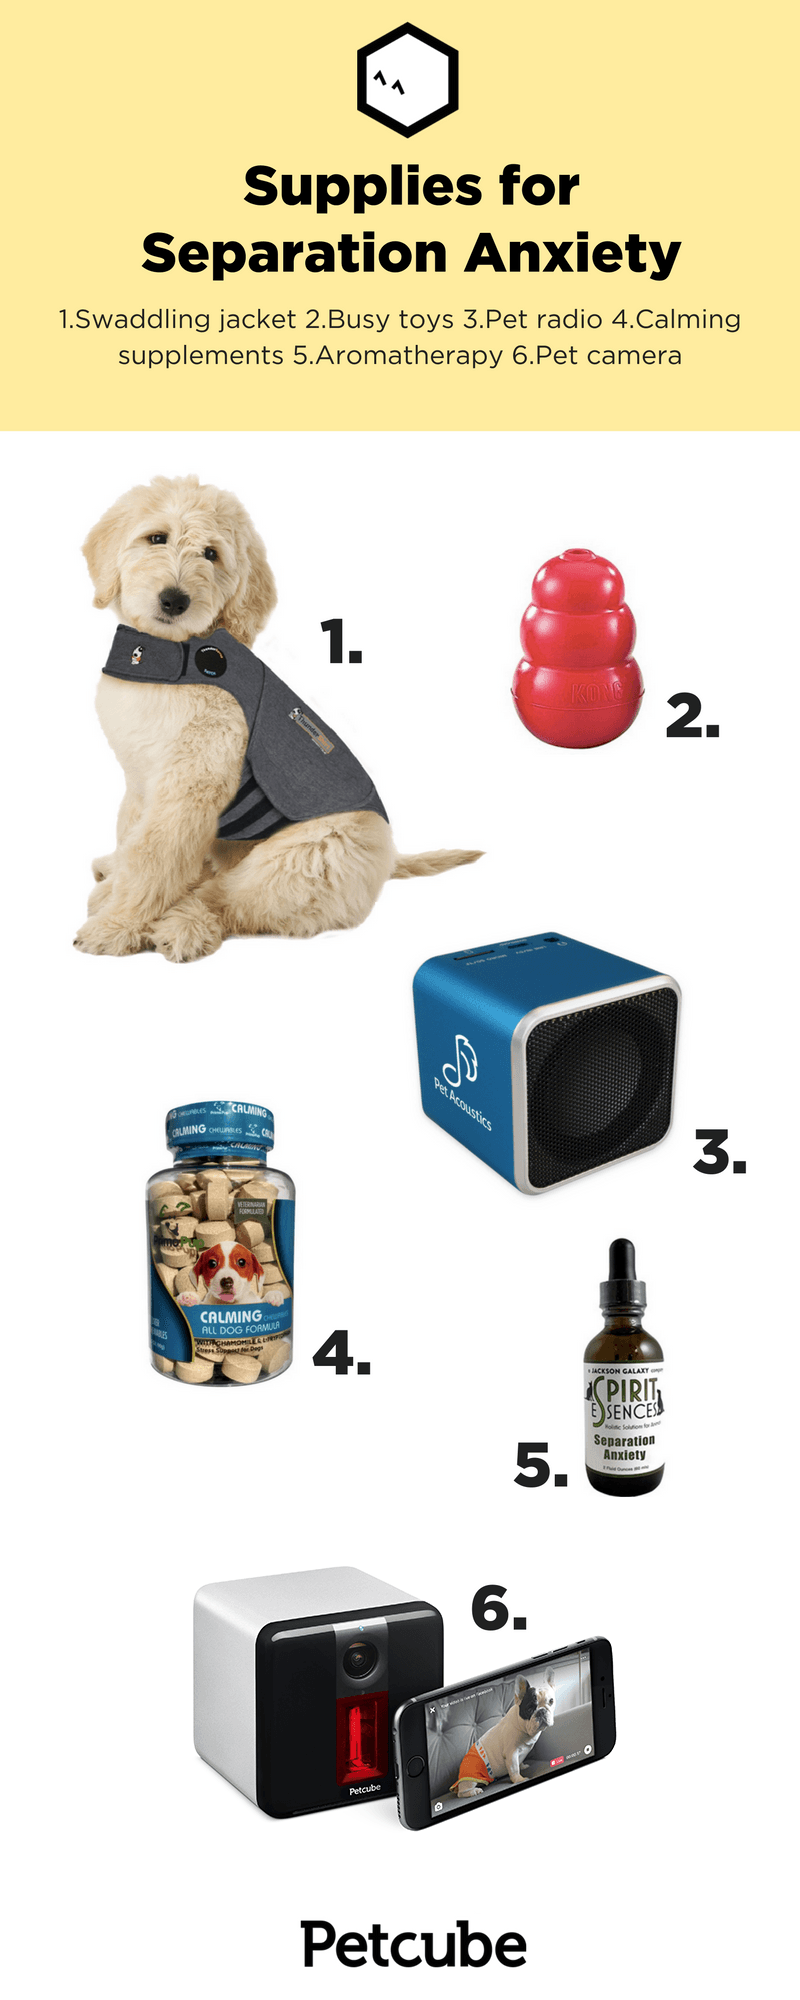 https://petcube.com/blog/content/images/2017/06/Supplies-to-Help-Separation-Anxiety-compressed.png